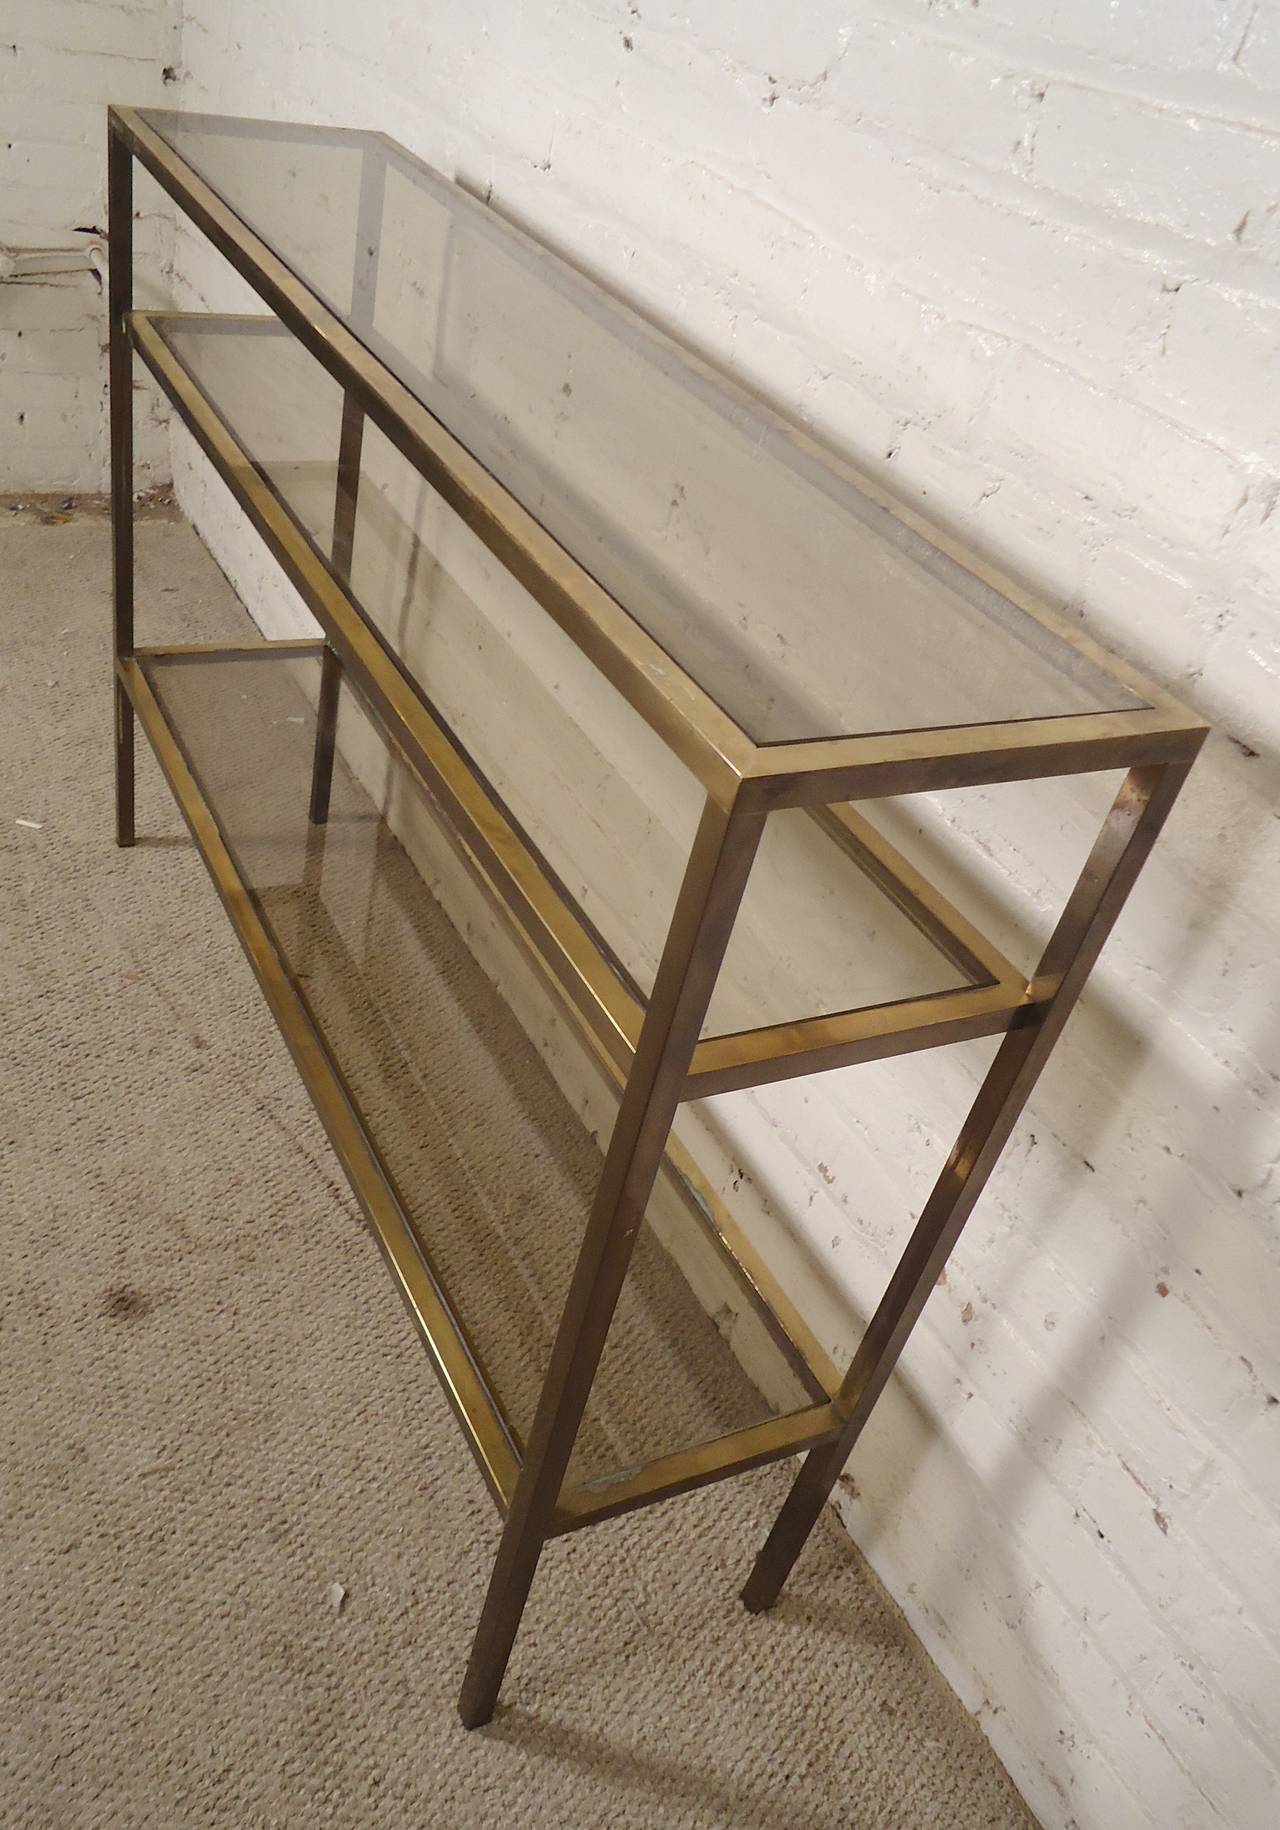 Mid-century long table with three levels of smoked glass. Handsome Mastercraft style, makes a great sofa or entry way table.

(Please confirm item location - NY or NJ - with dealer)